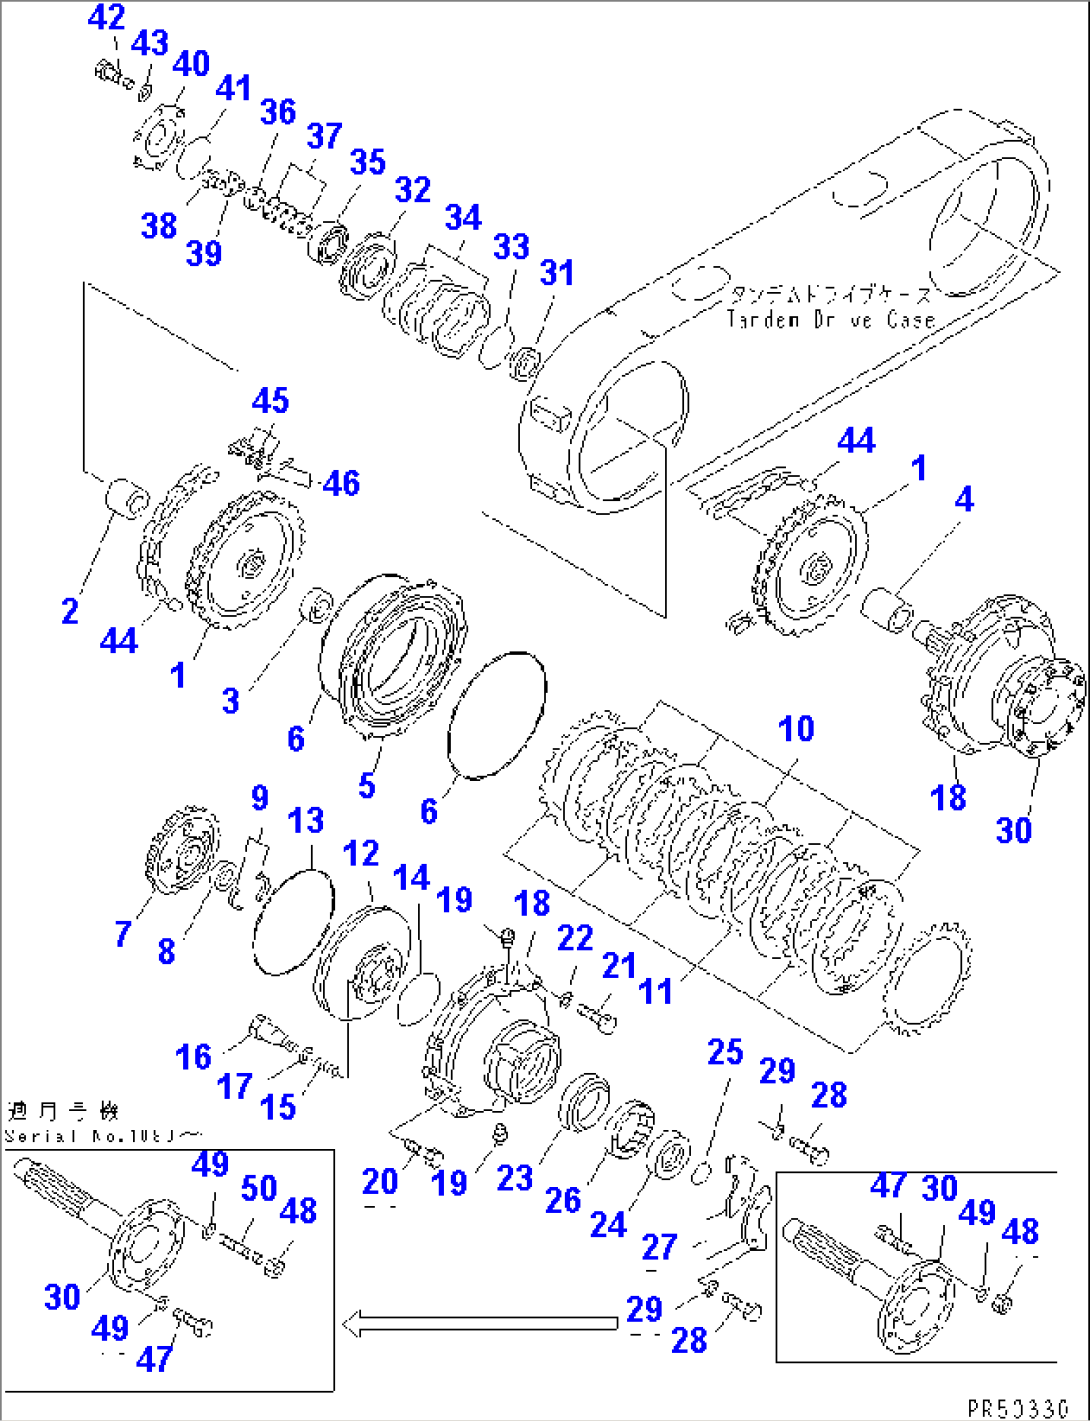 TANDEM DRIVE GEAR AND CHAIN